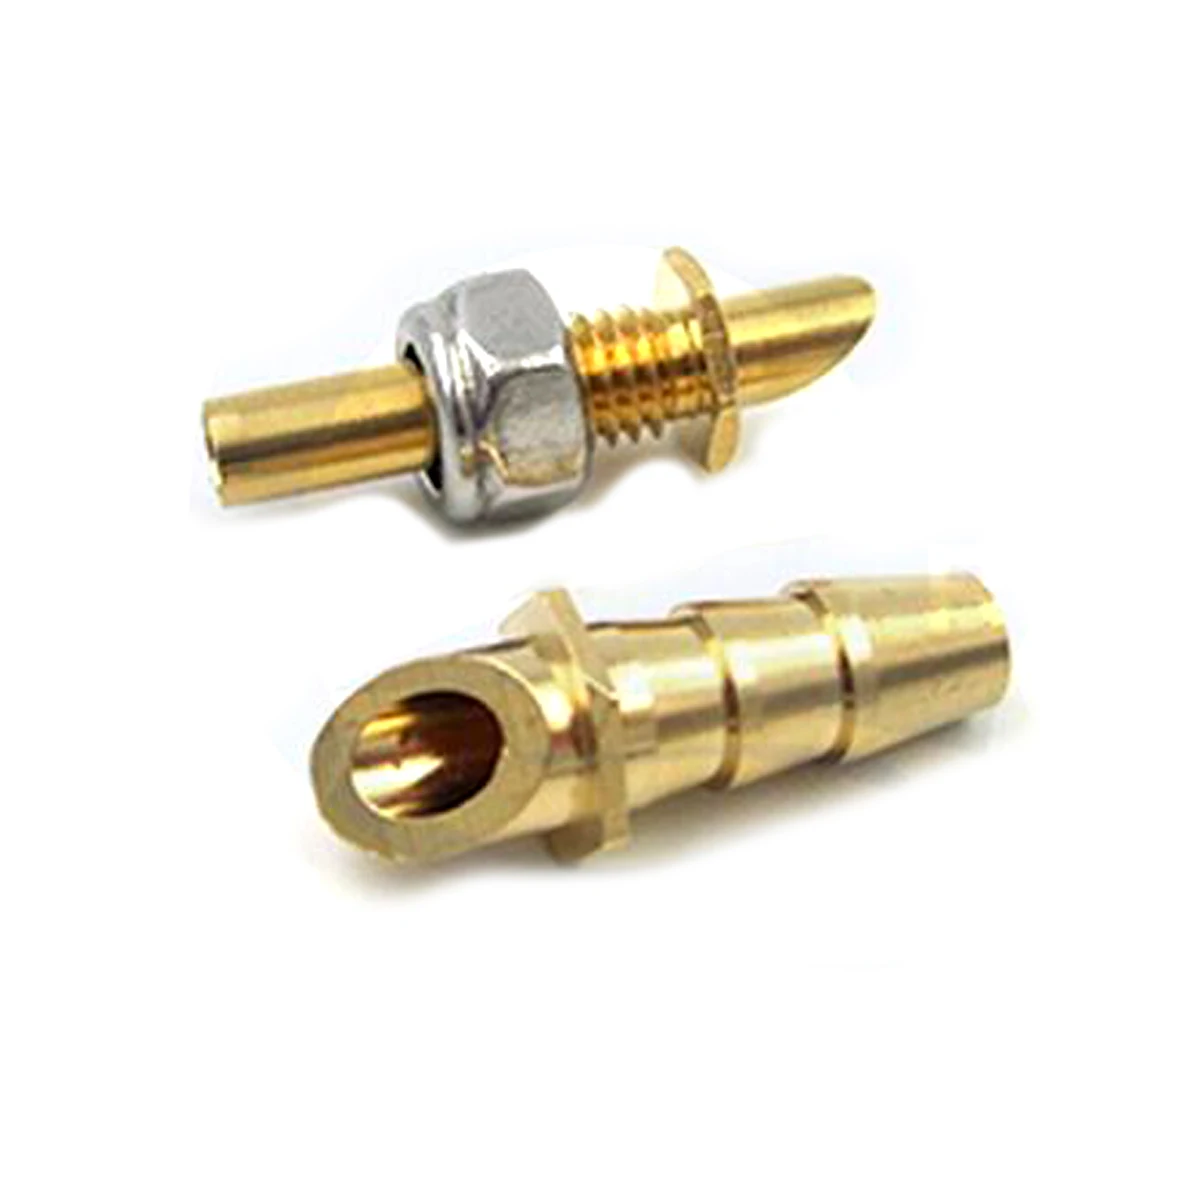 M5 Copper 2* Pick Up Inlet Nozzle Cooling Nipple For RC Model Boat M5 Thread 